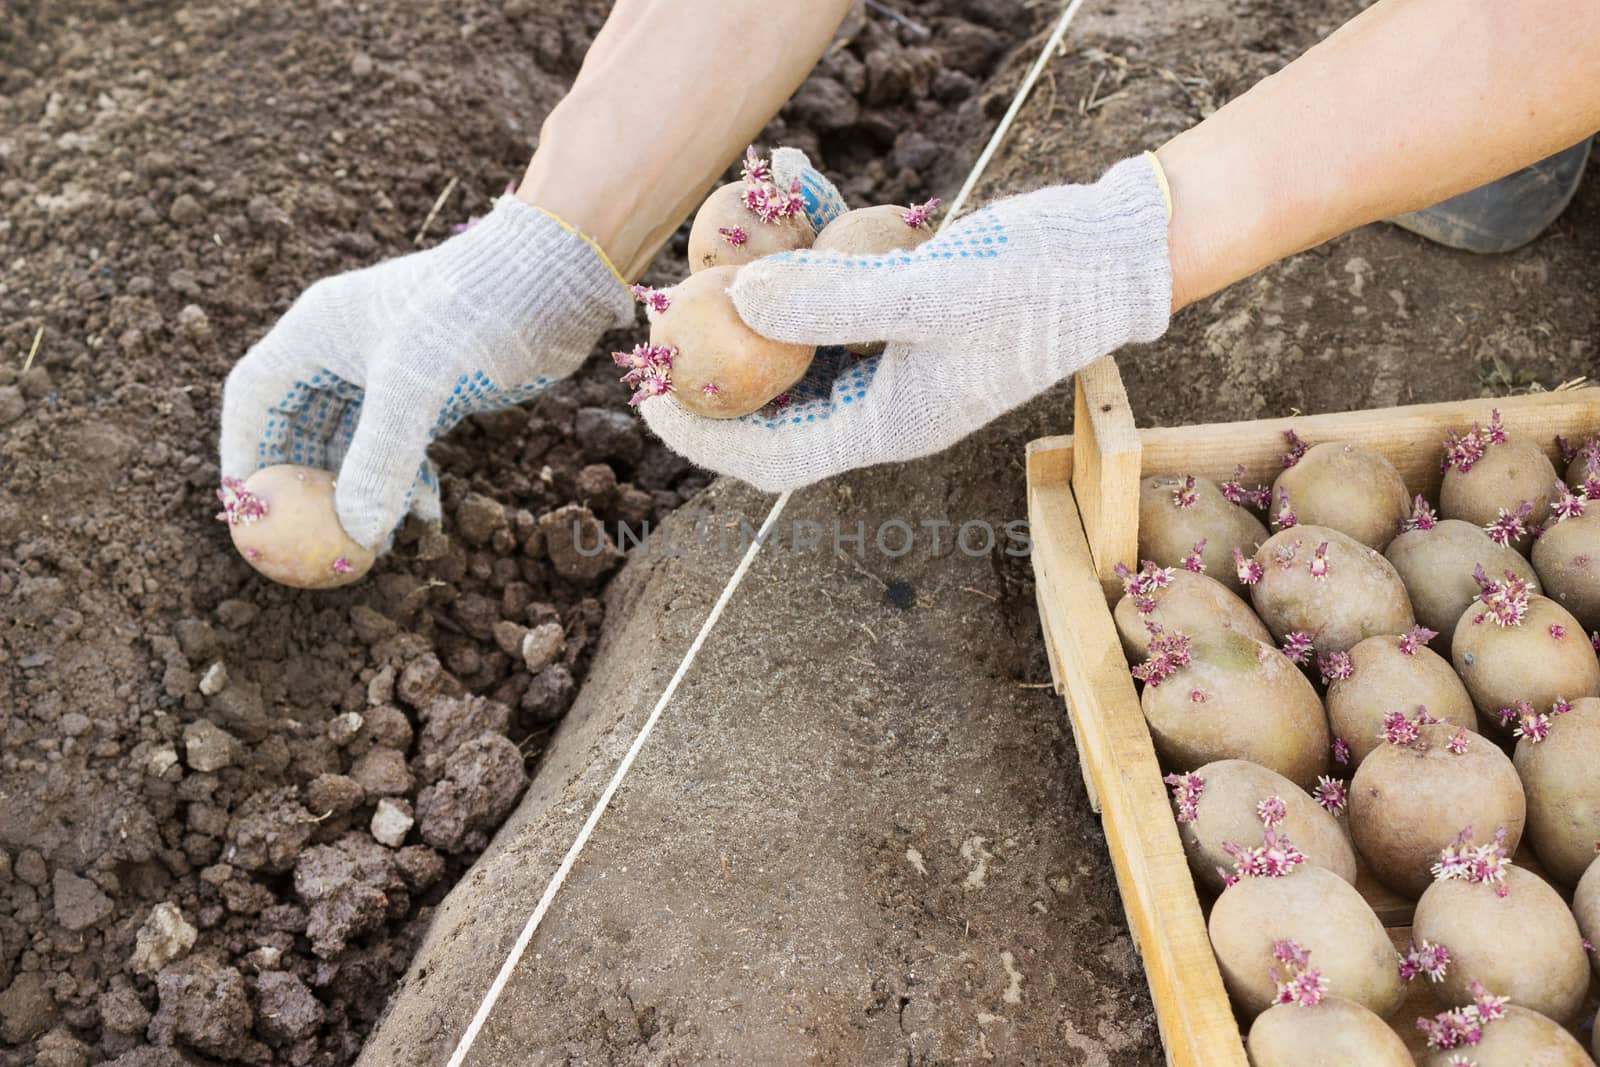 Jarovize and  planting potatoes  manually in your garden spring